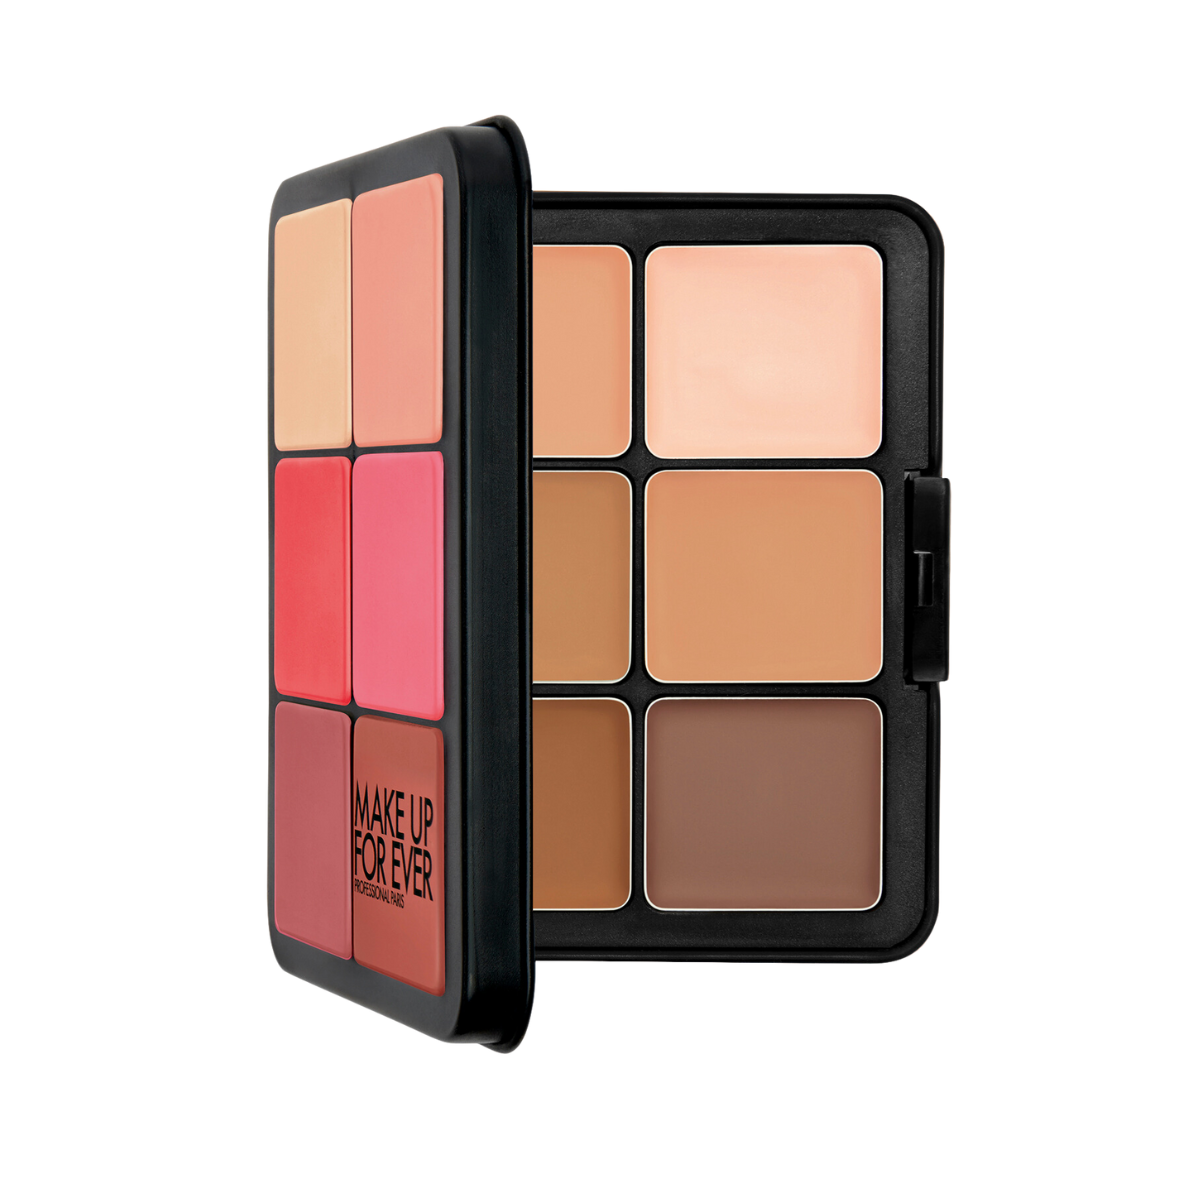 Shop Make Up For Ever Hd Skin Face Essentials Palette With Highlighters In Light To Medium Skintone